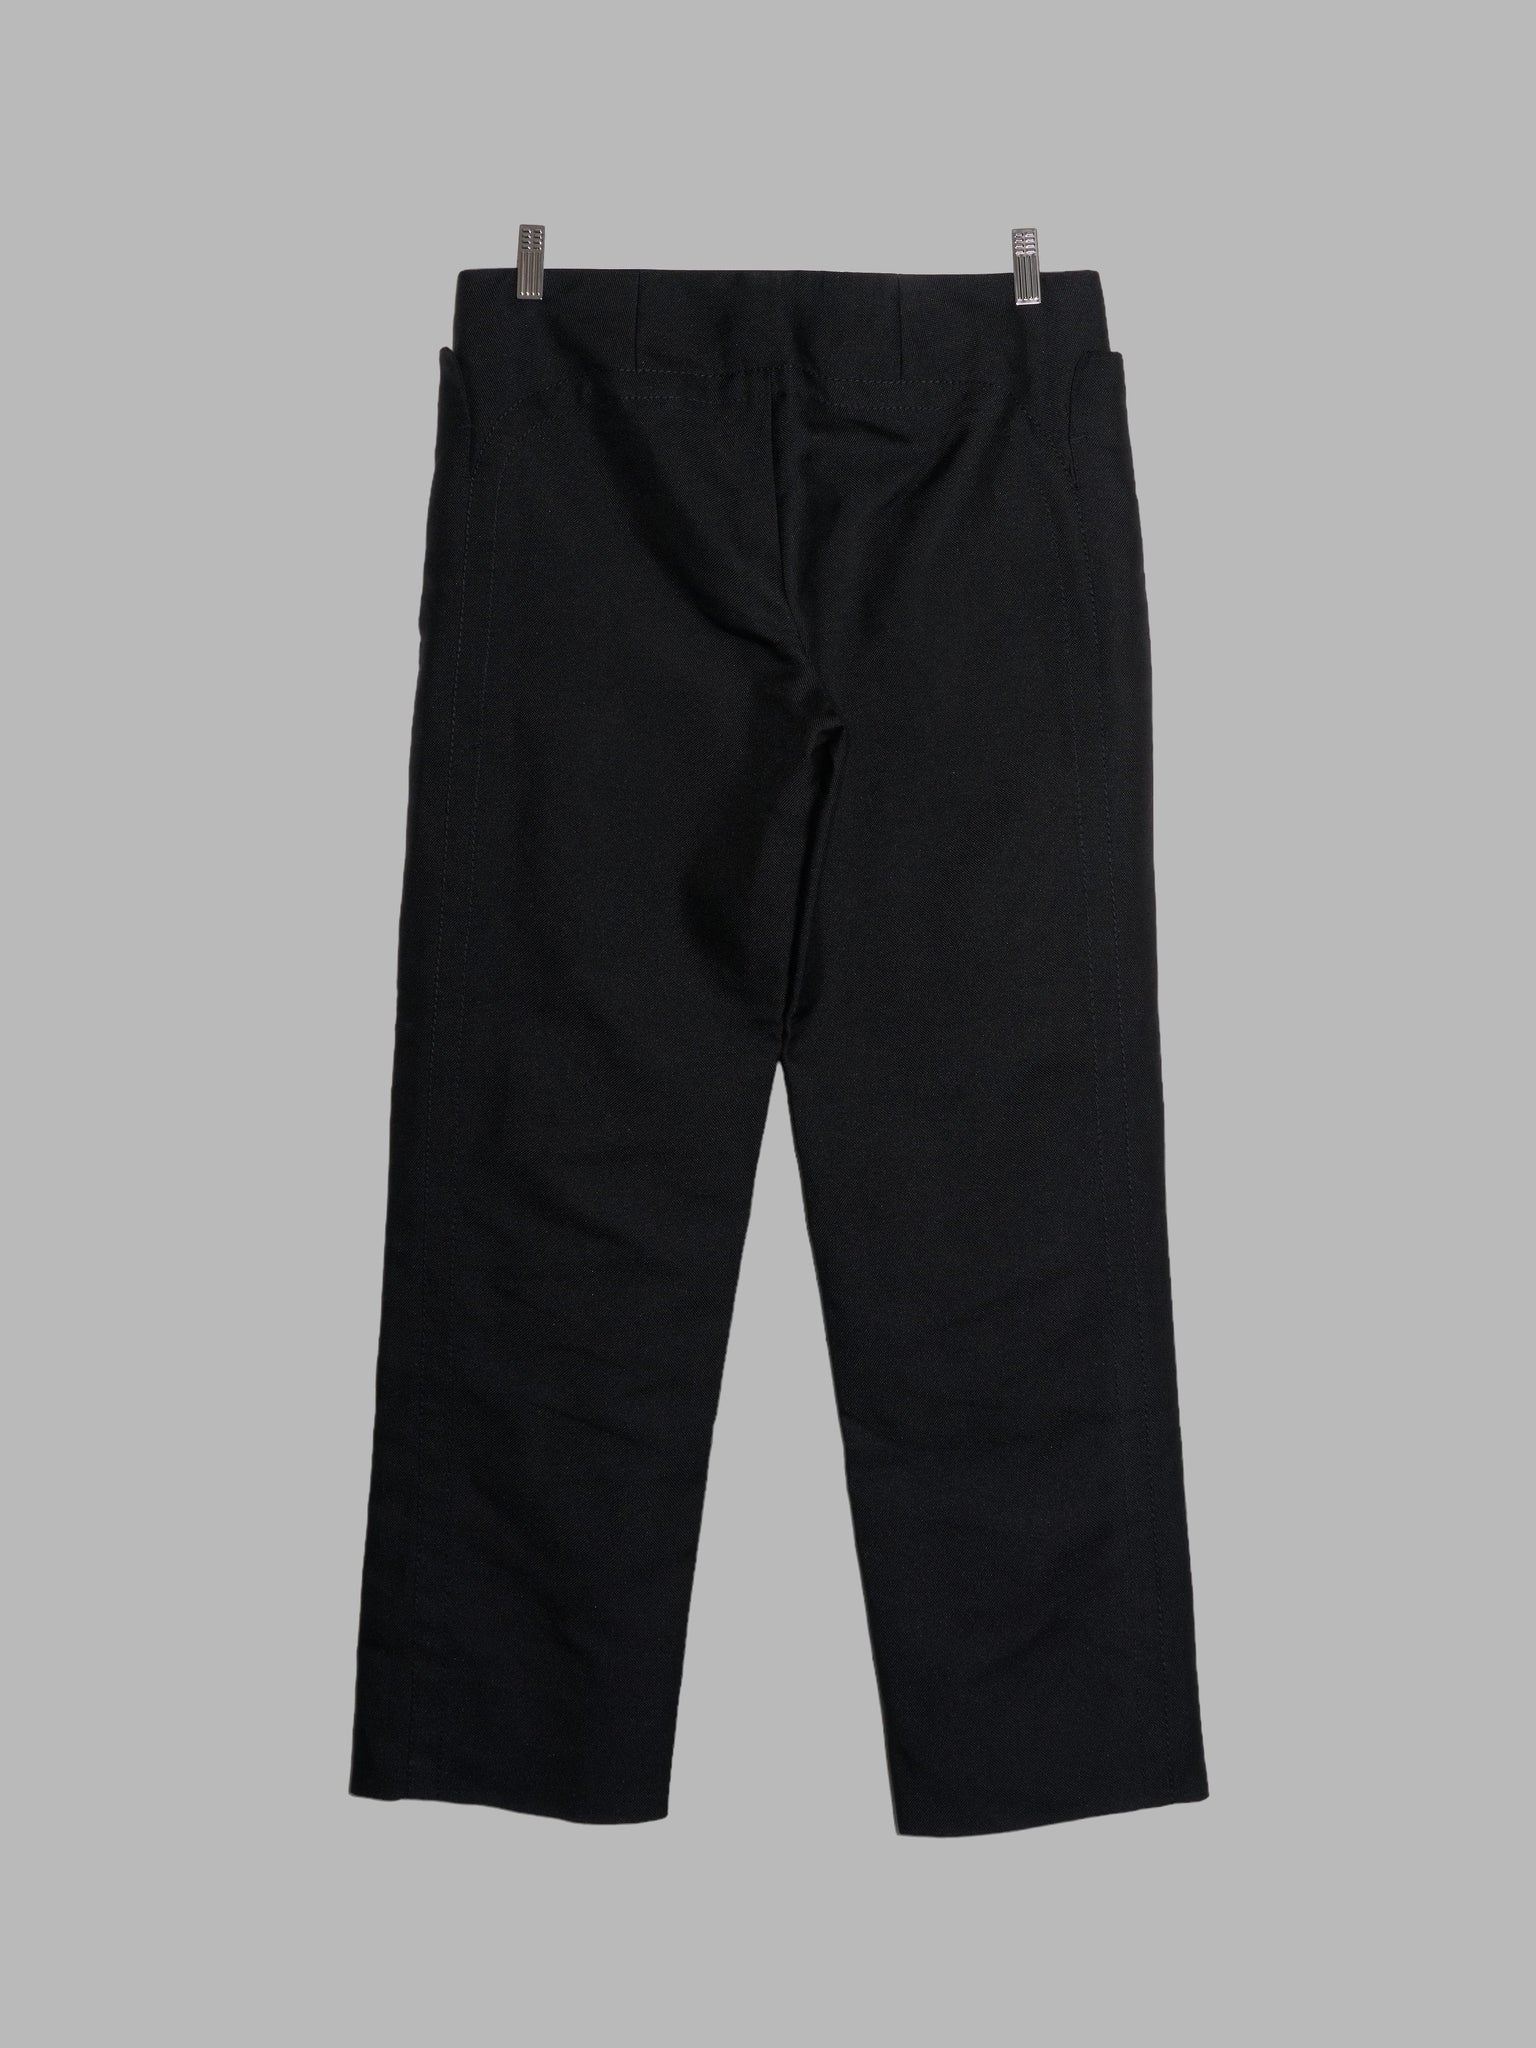 Dirk Bikkembergs 1990s 2000s black polyester canvas tapered trousers